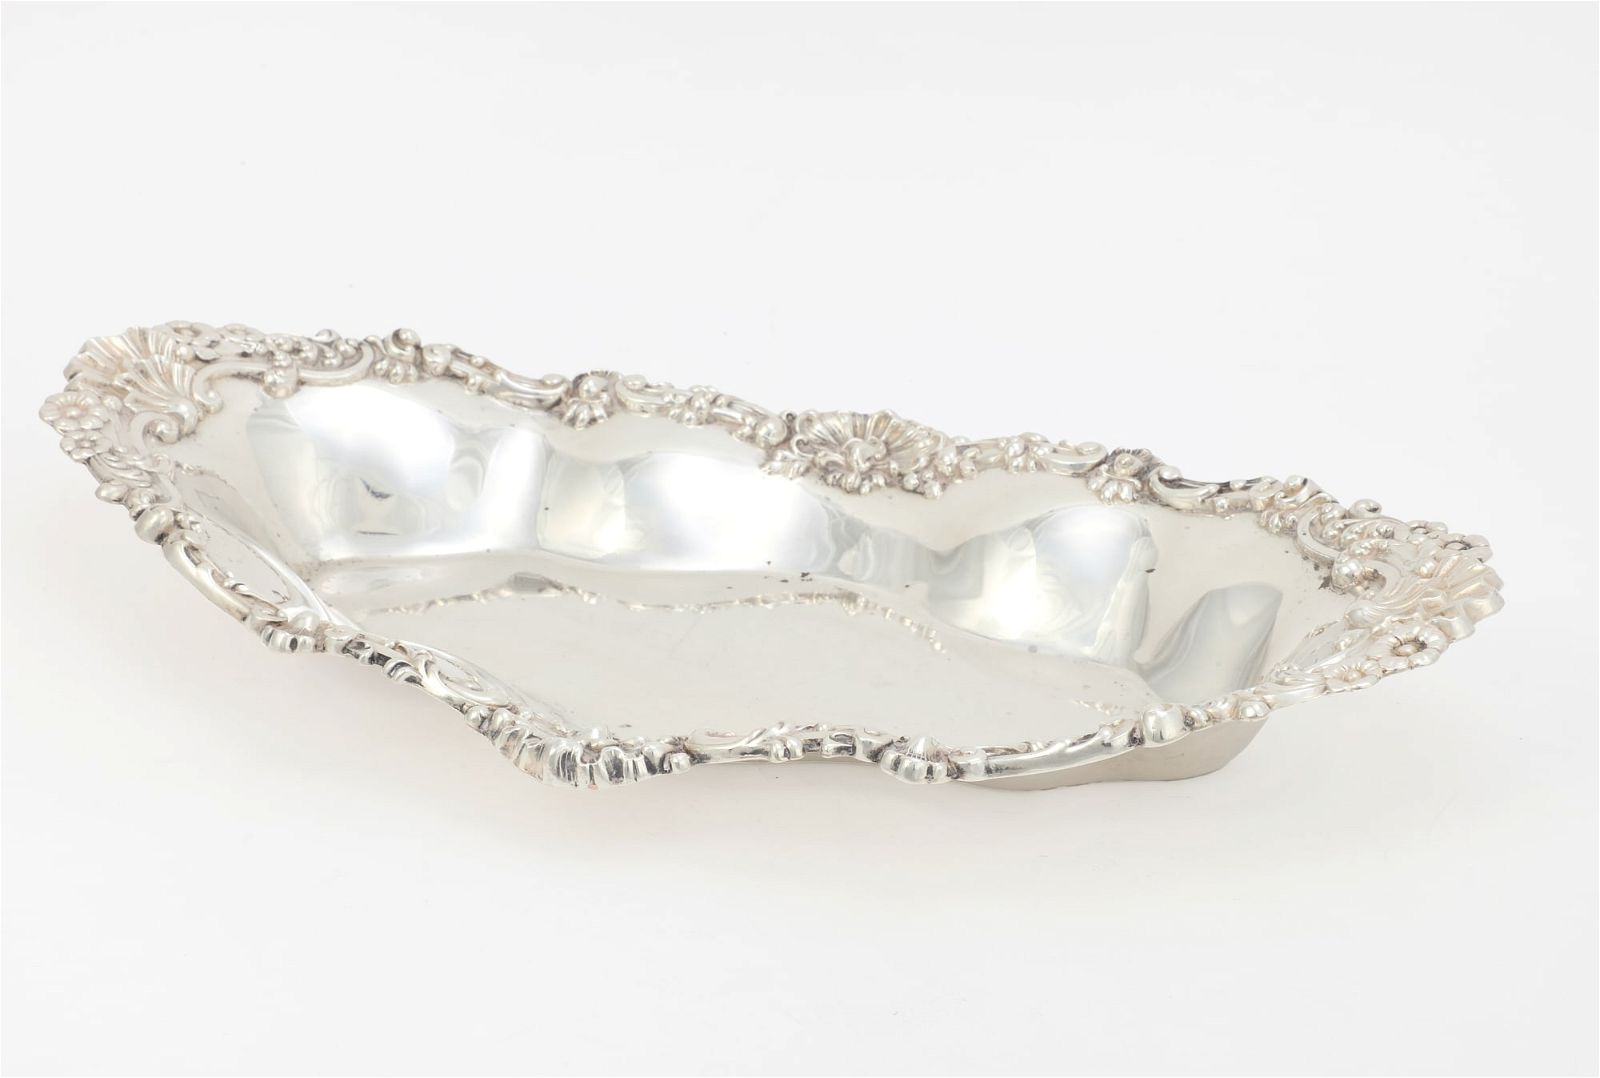 A DURGIN STERLING SILVER OVAL BREAD